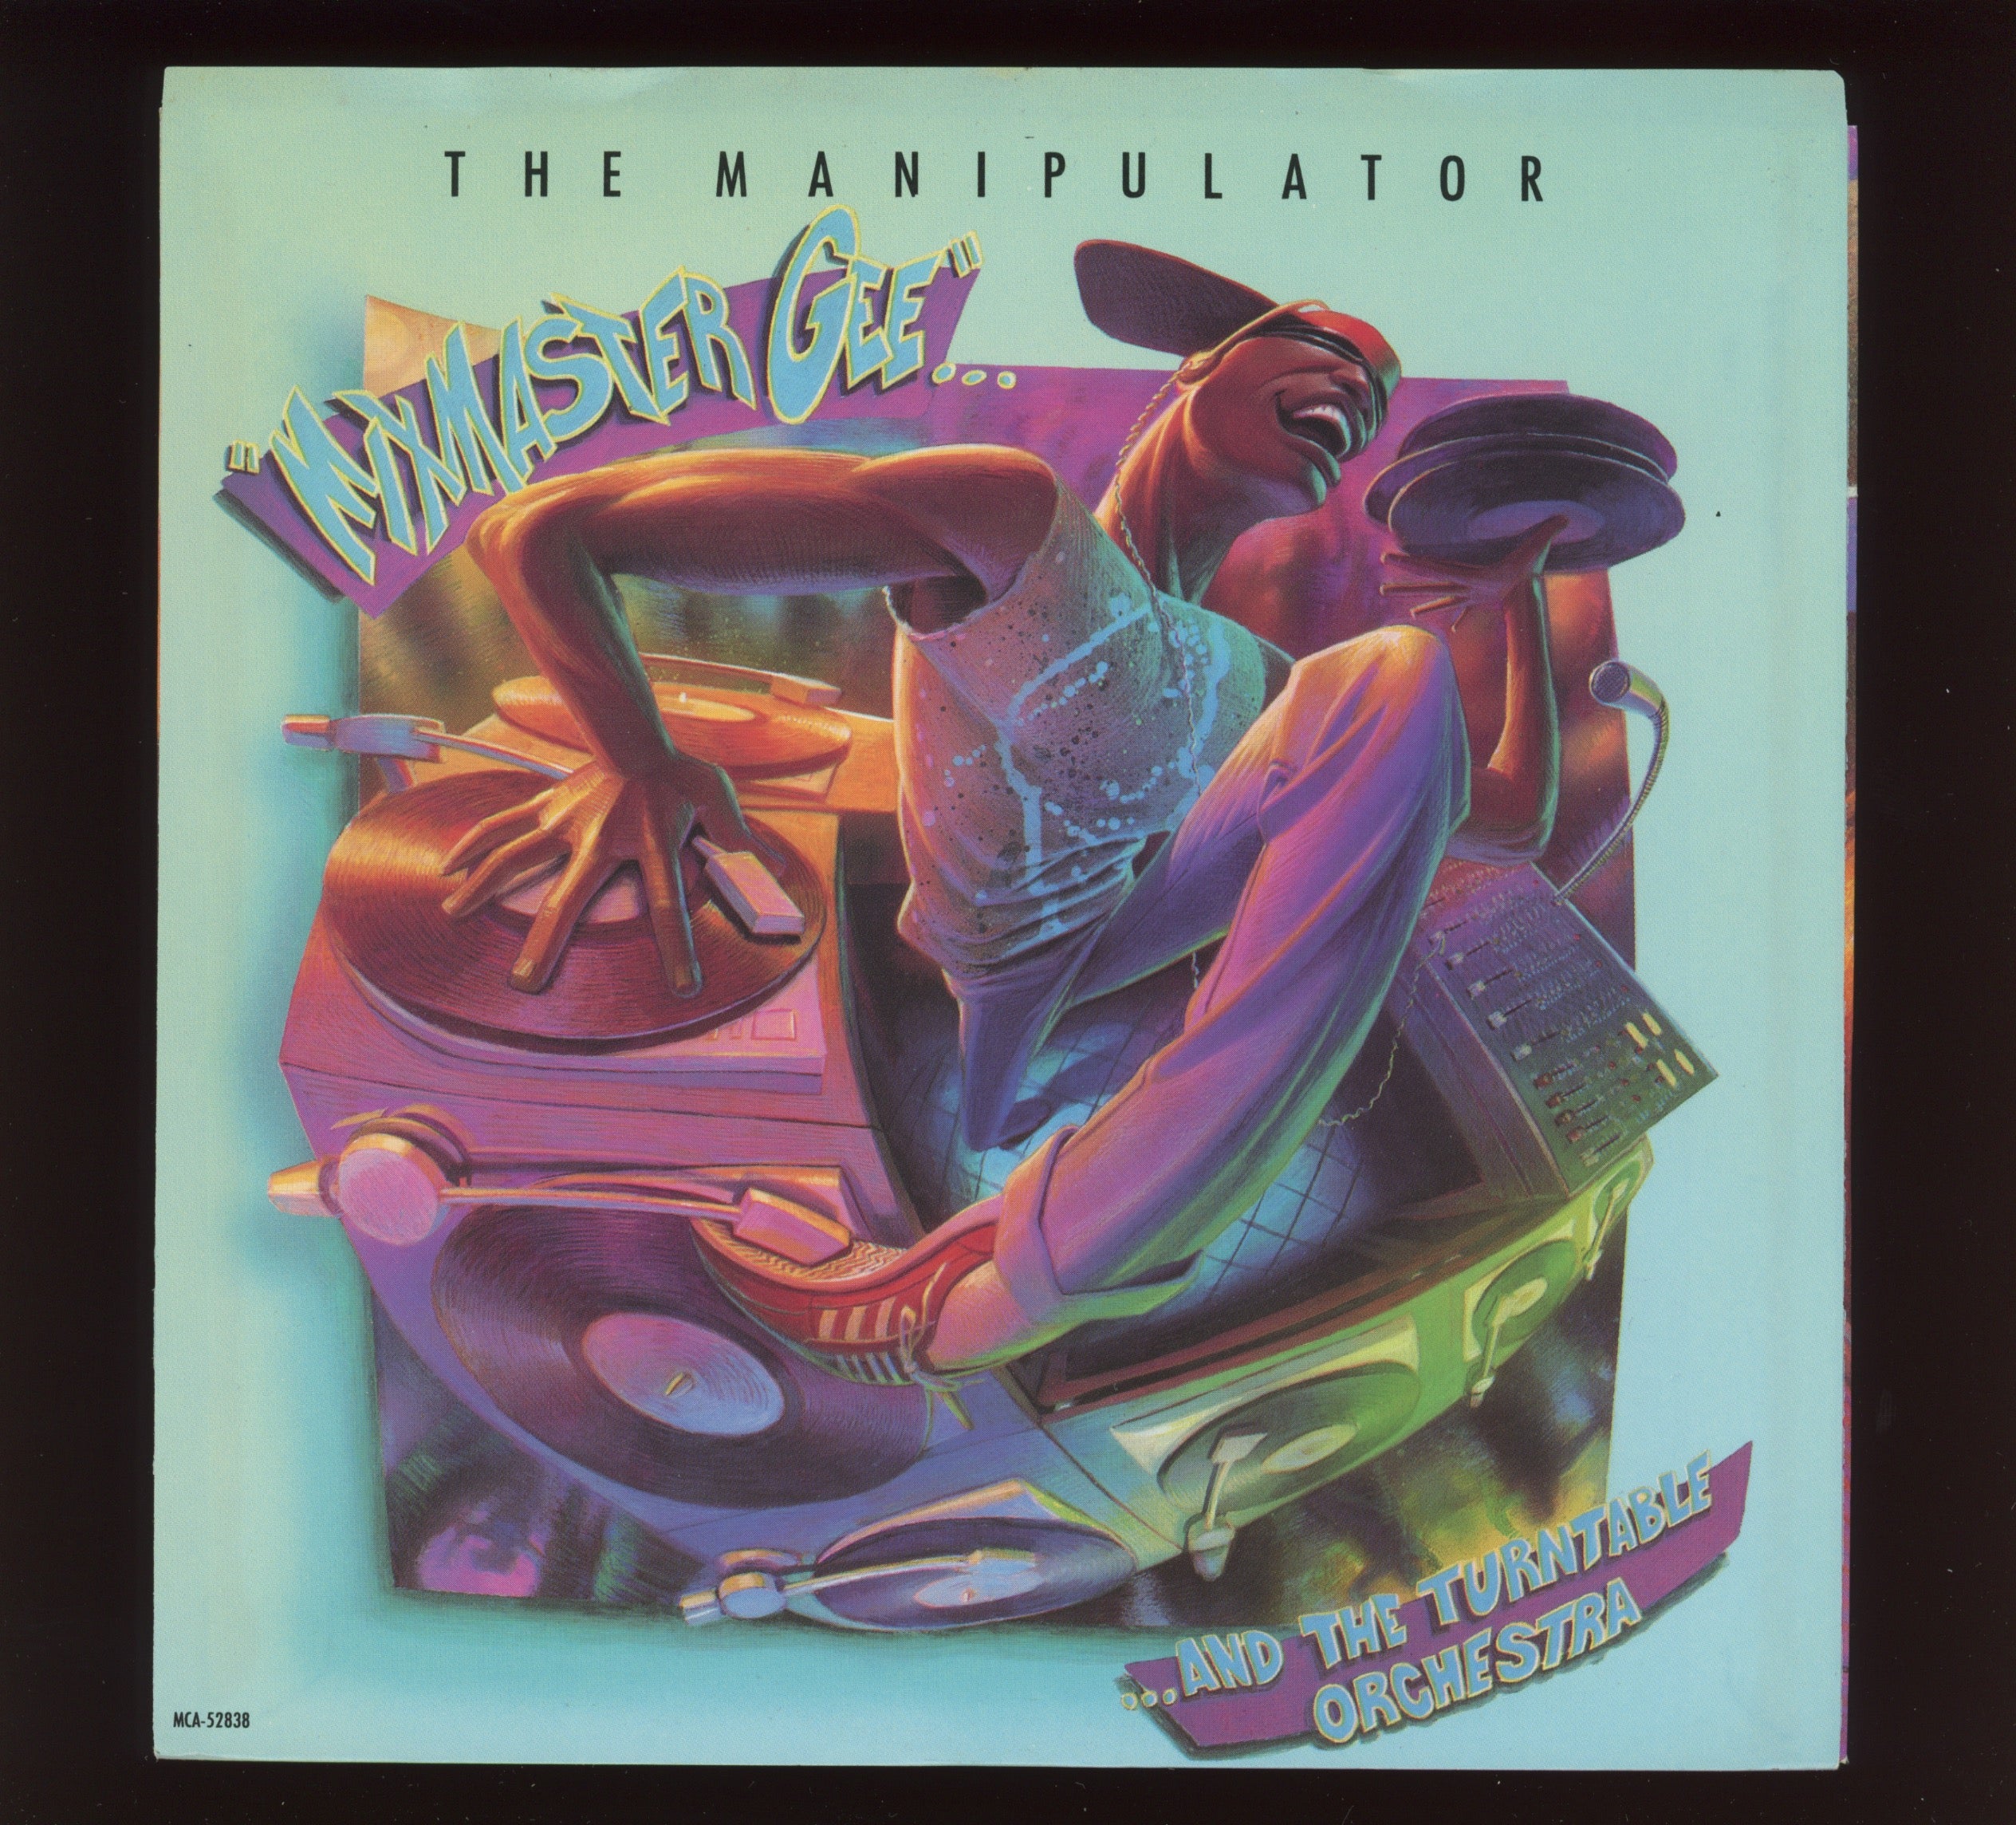 Mixmaster Gee And The Turntable Orchestra - The Manipulator on MCA With Picture Sleeve